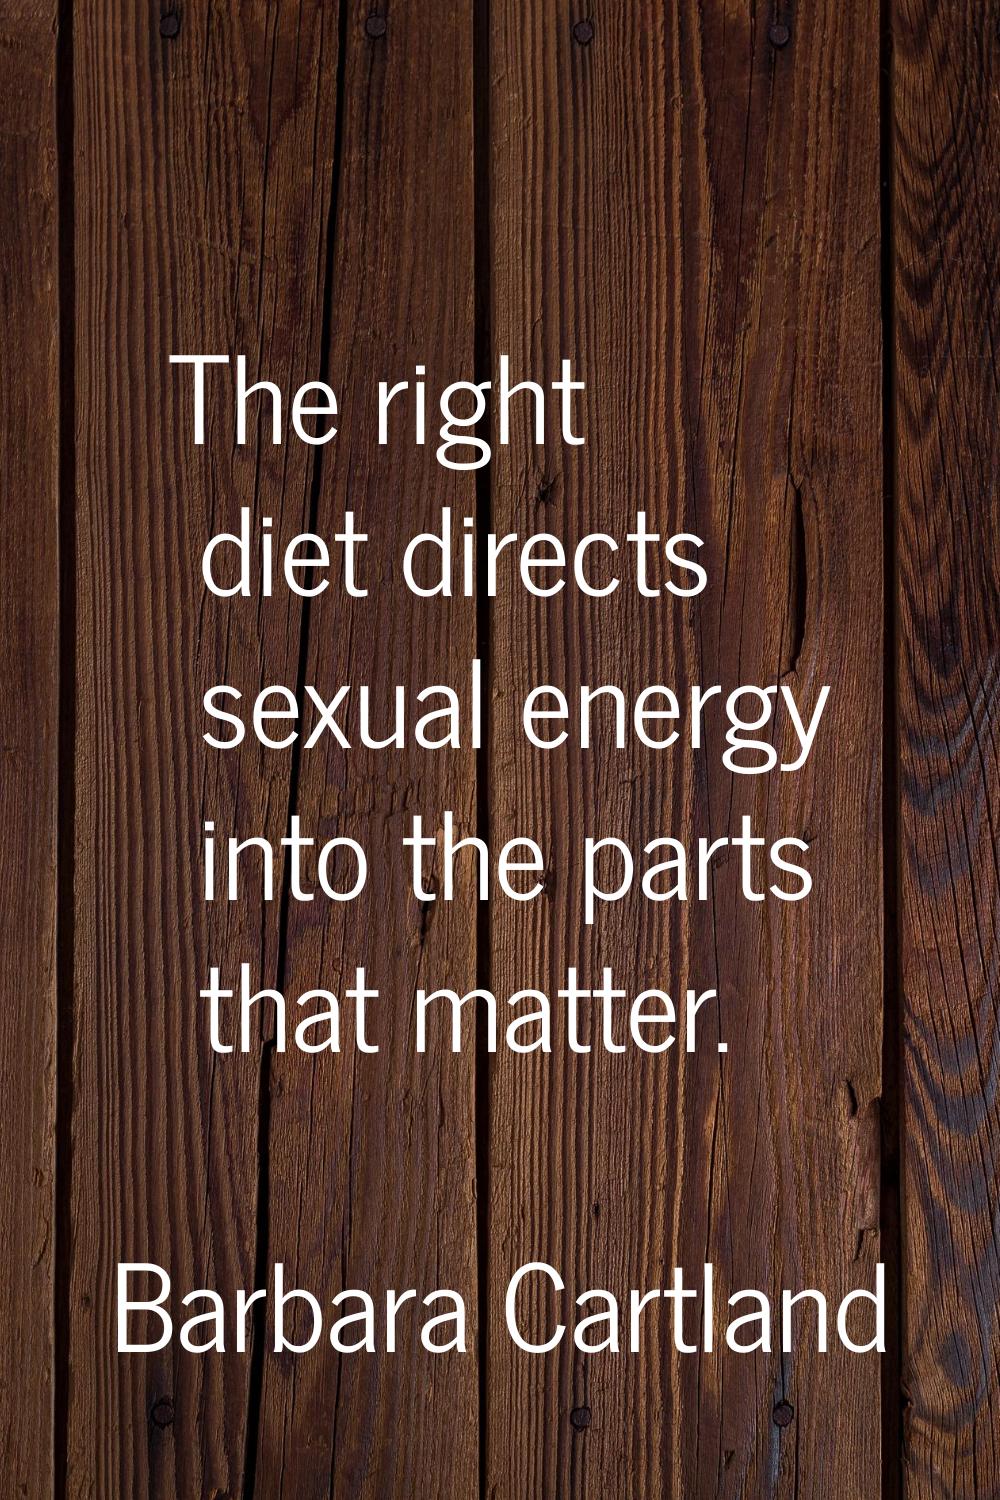 The right diet directs sexual energy into the parts that matter.